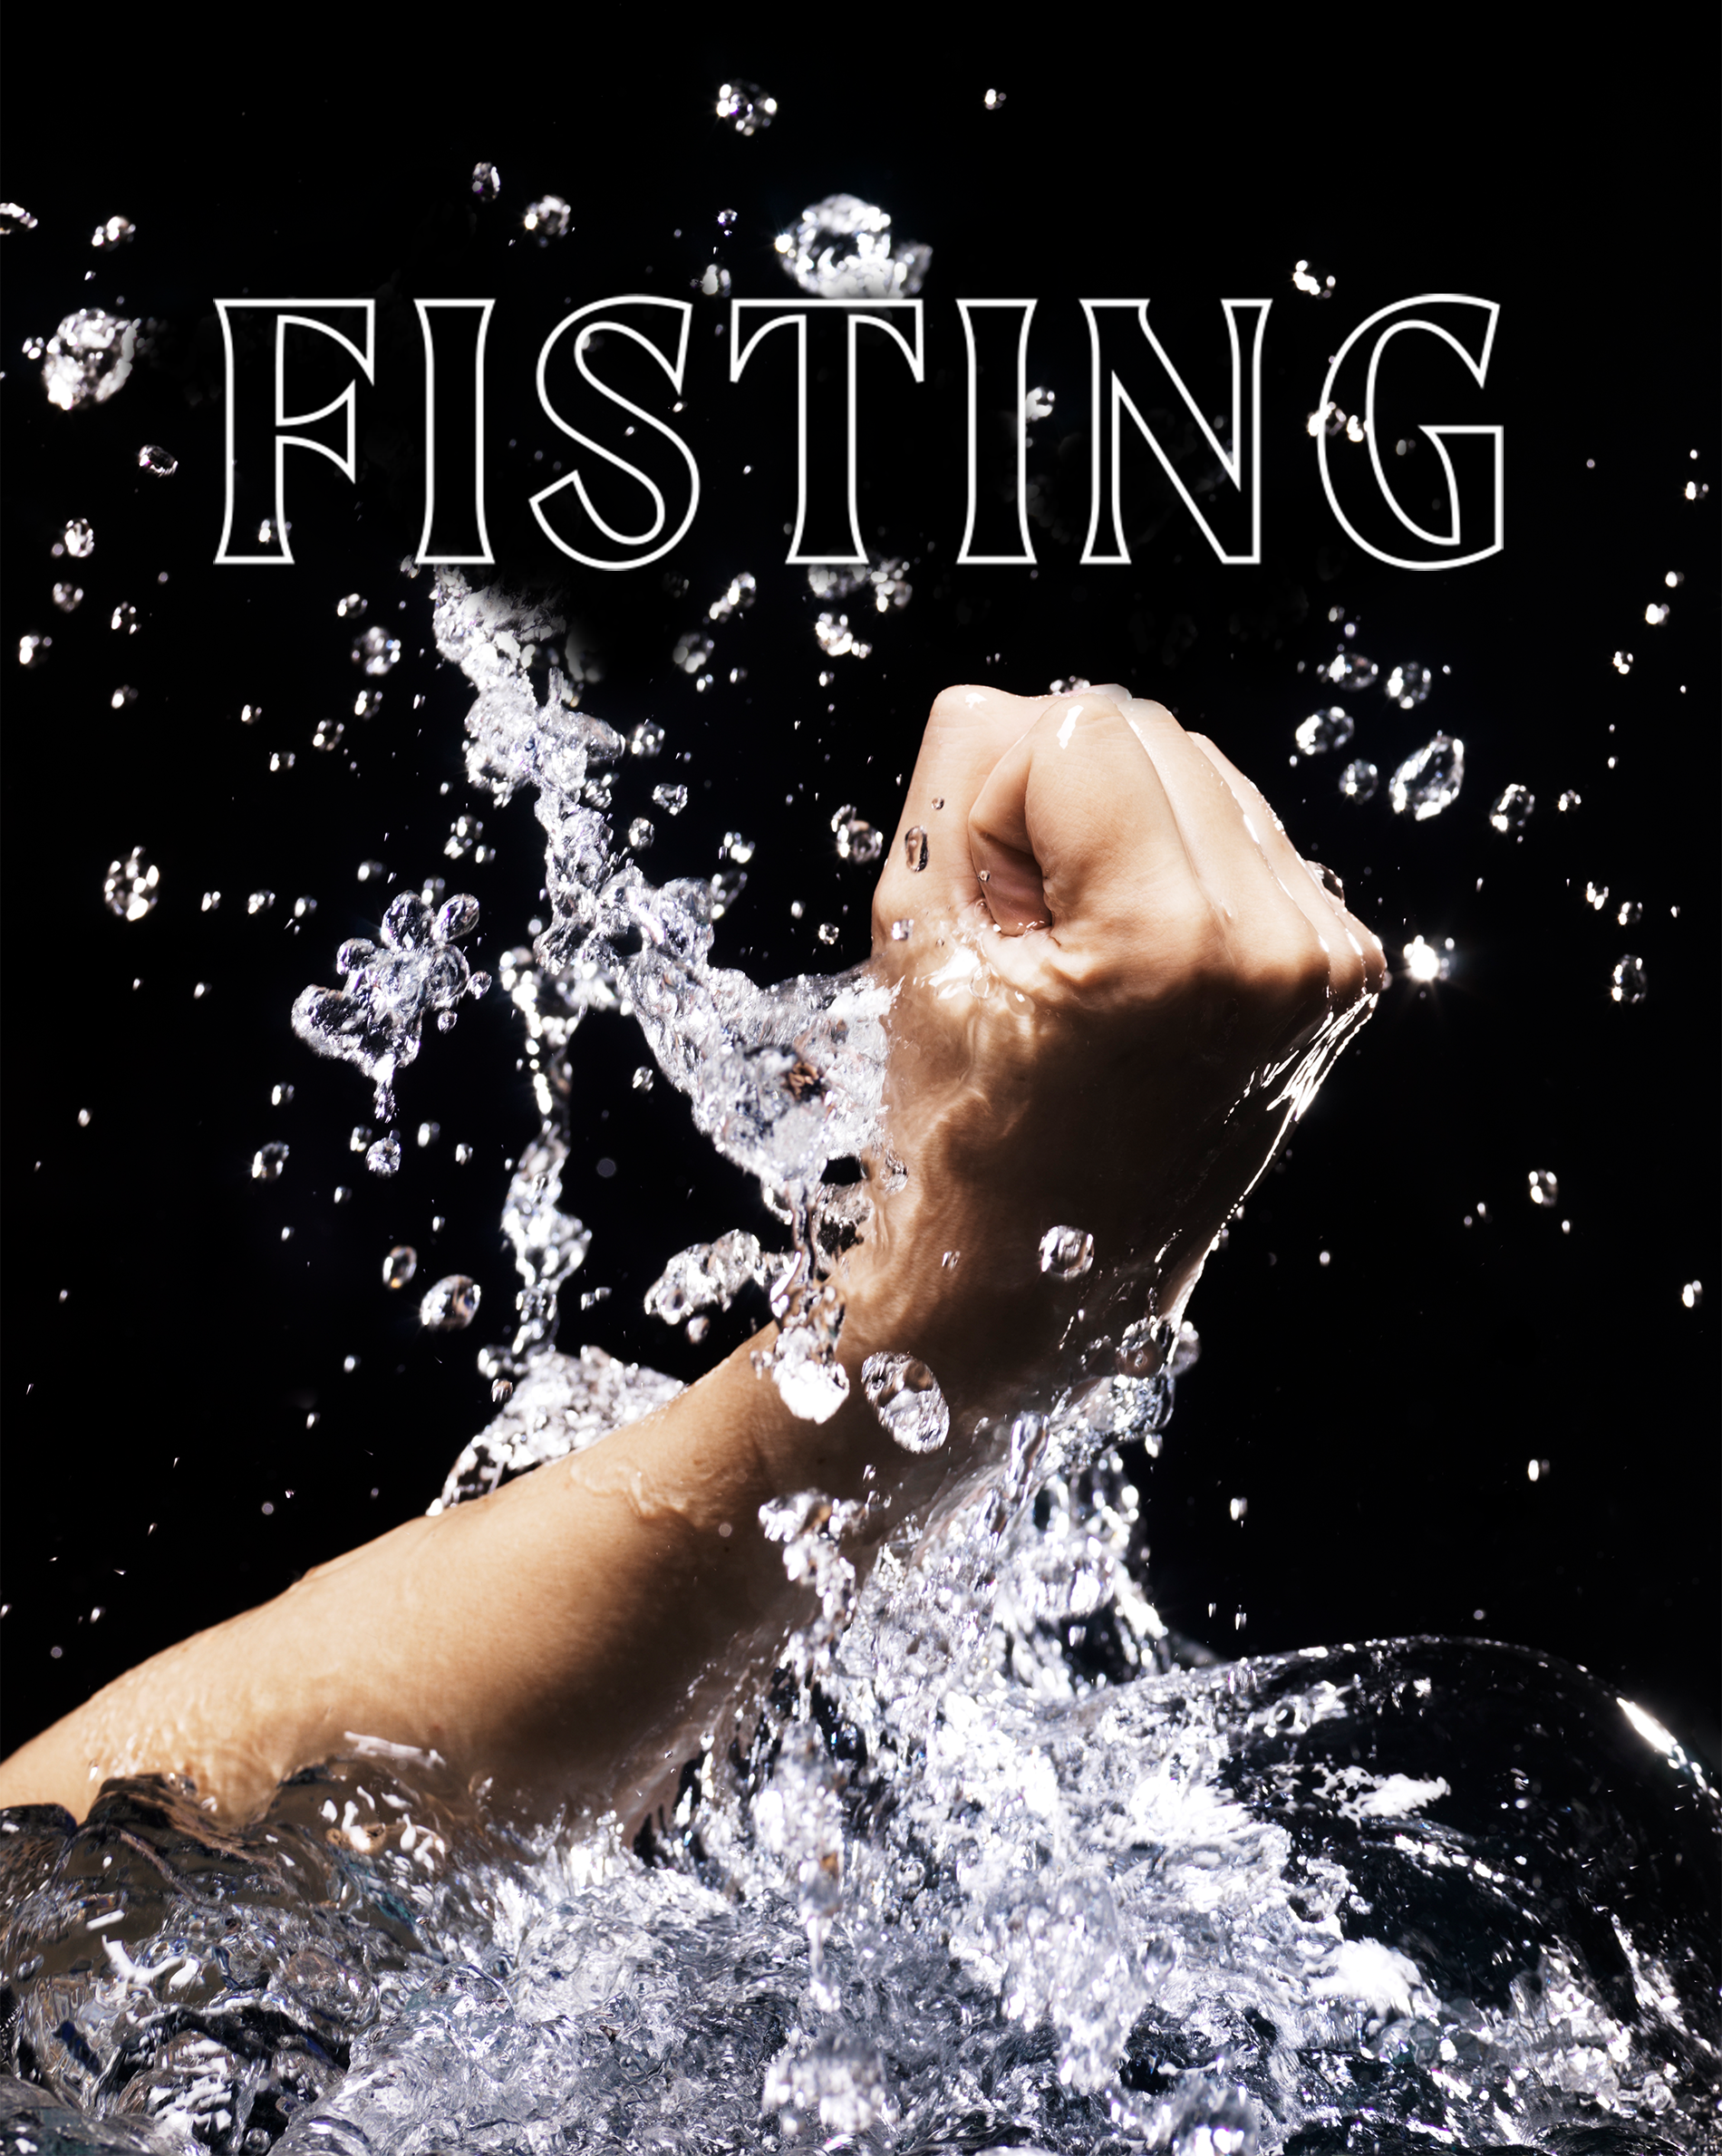 Fisting Exercise - 24 Fisting Tips for Beginners - How Do You Fist A Woman?